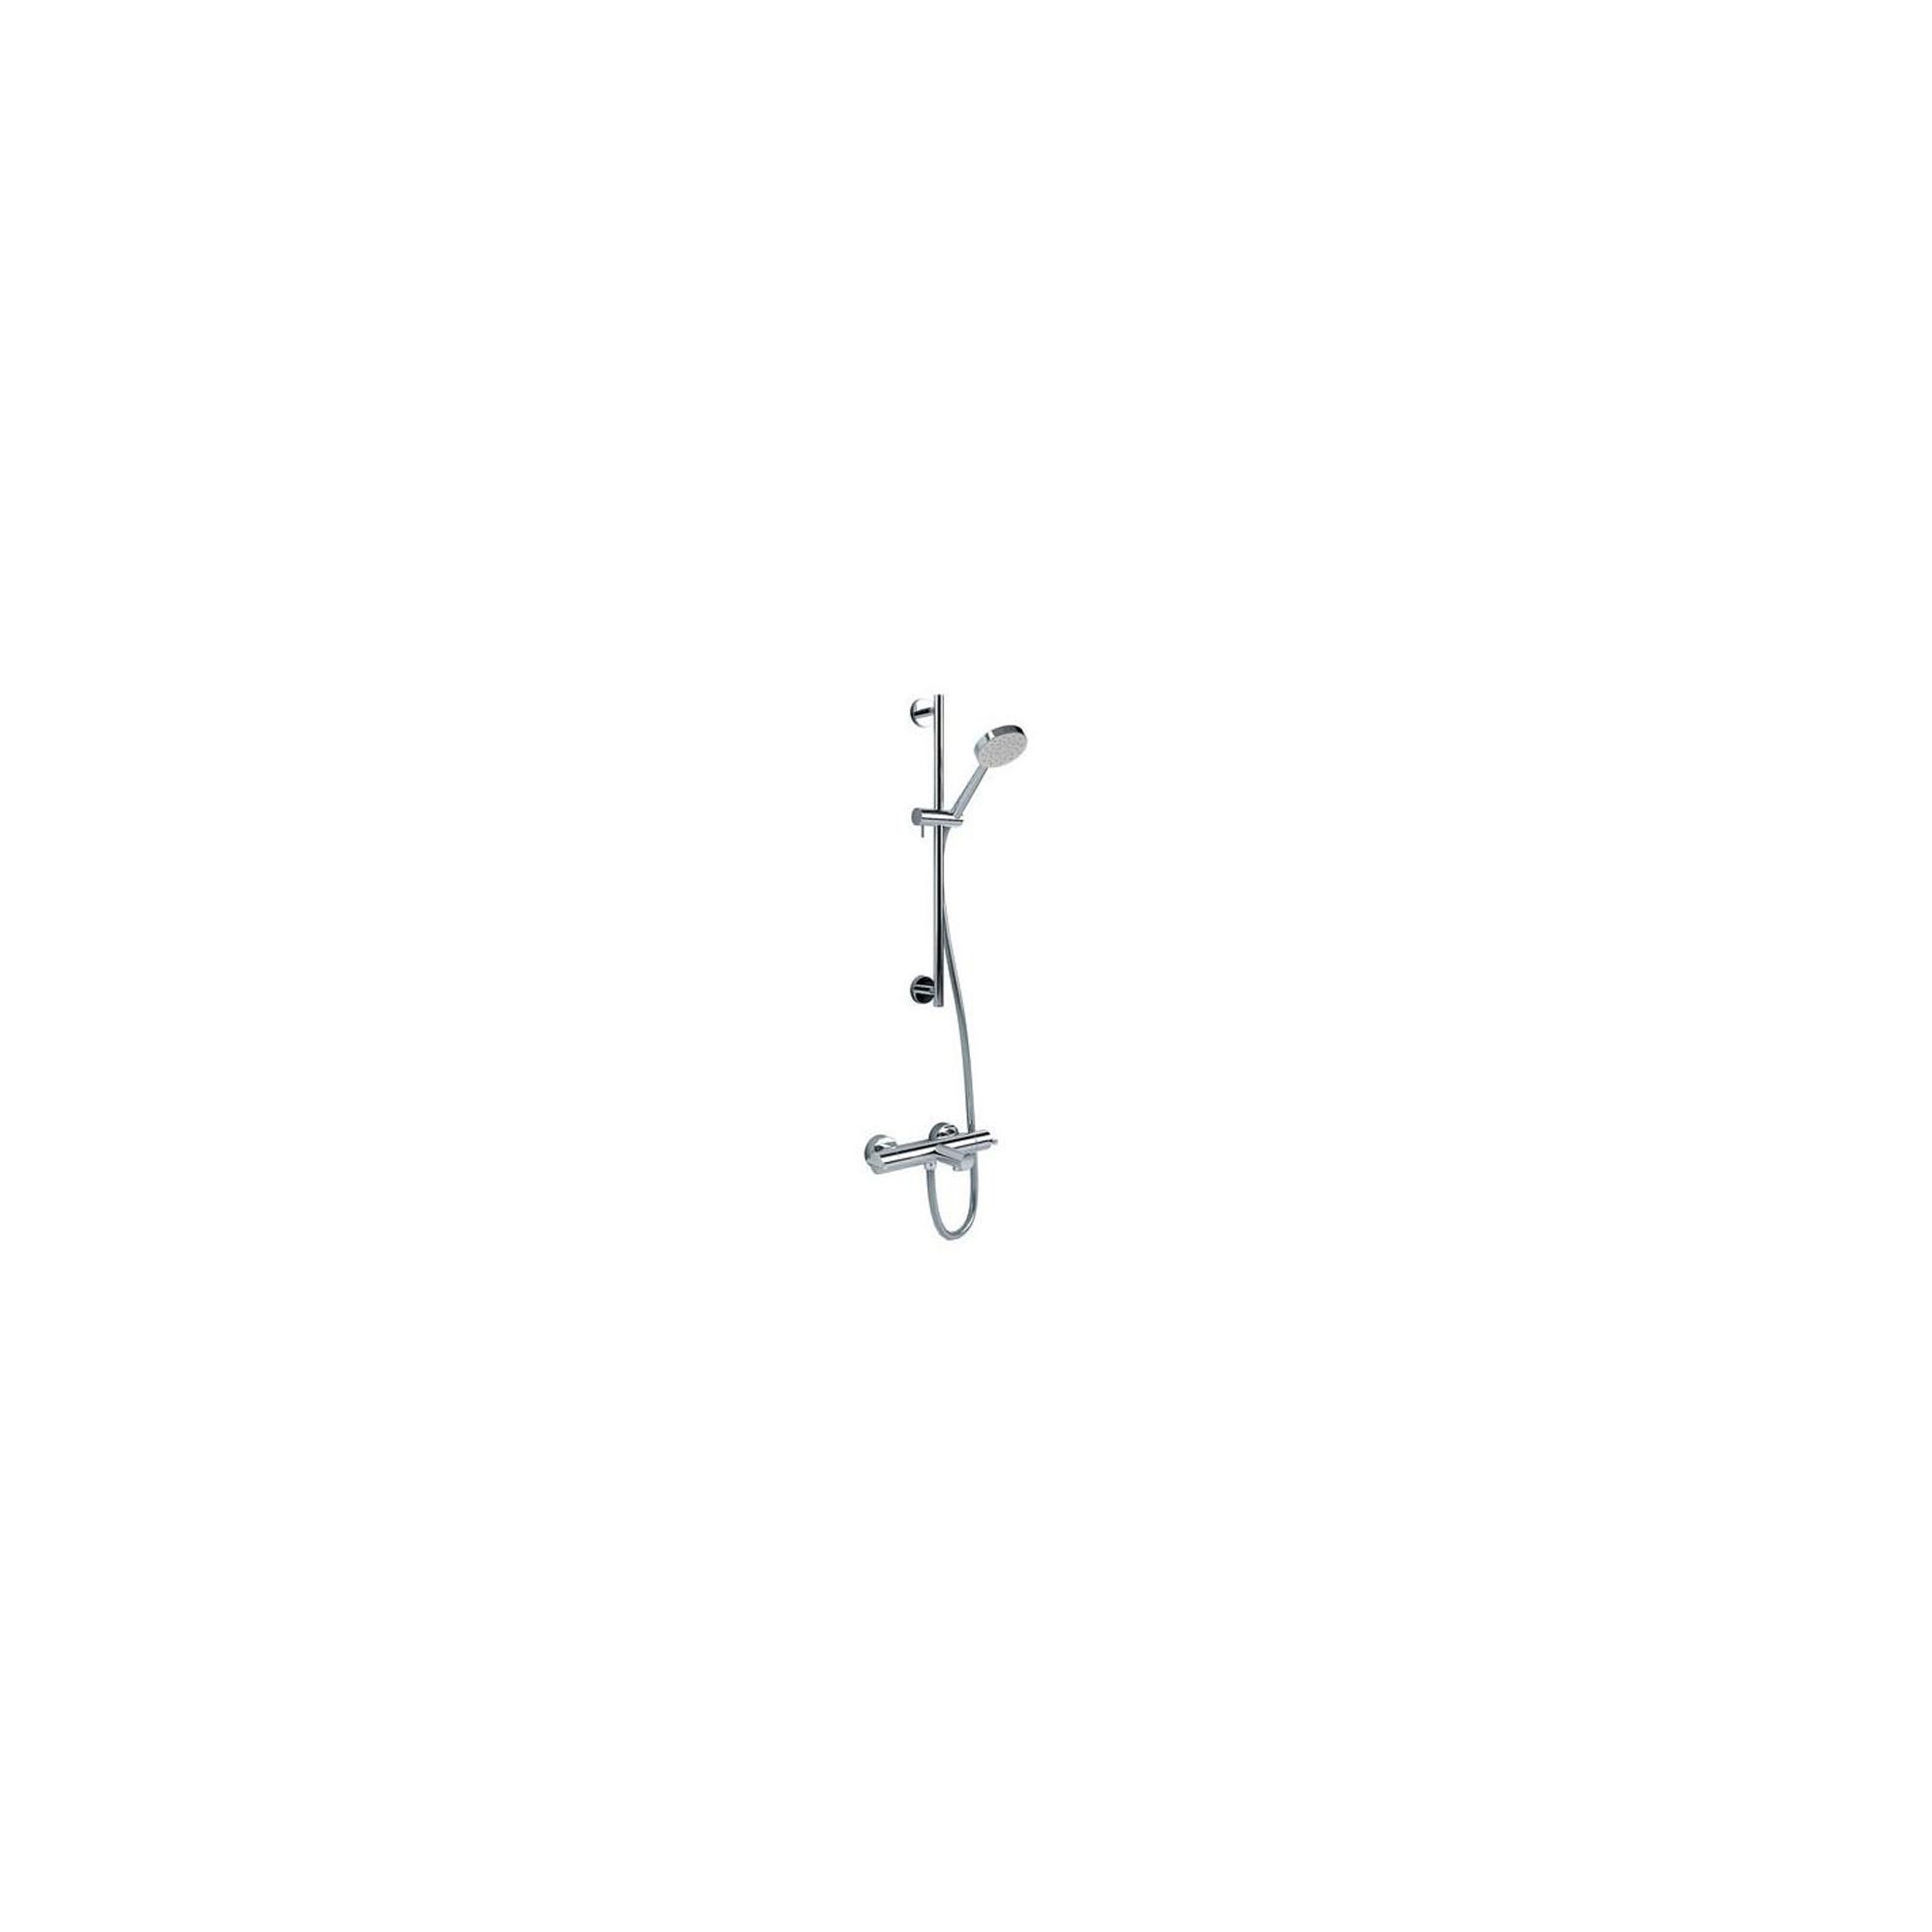 Inta City Thermostatic Bath Shower Mixer Tap with Shower Kit Chrome at Tesco Direct